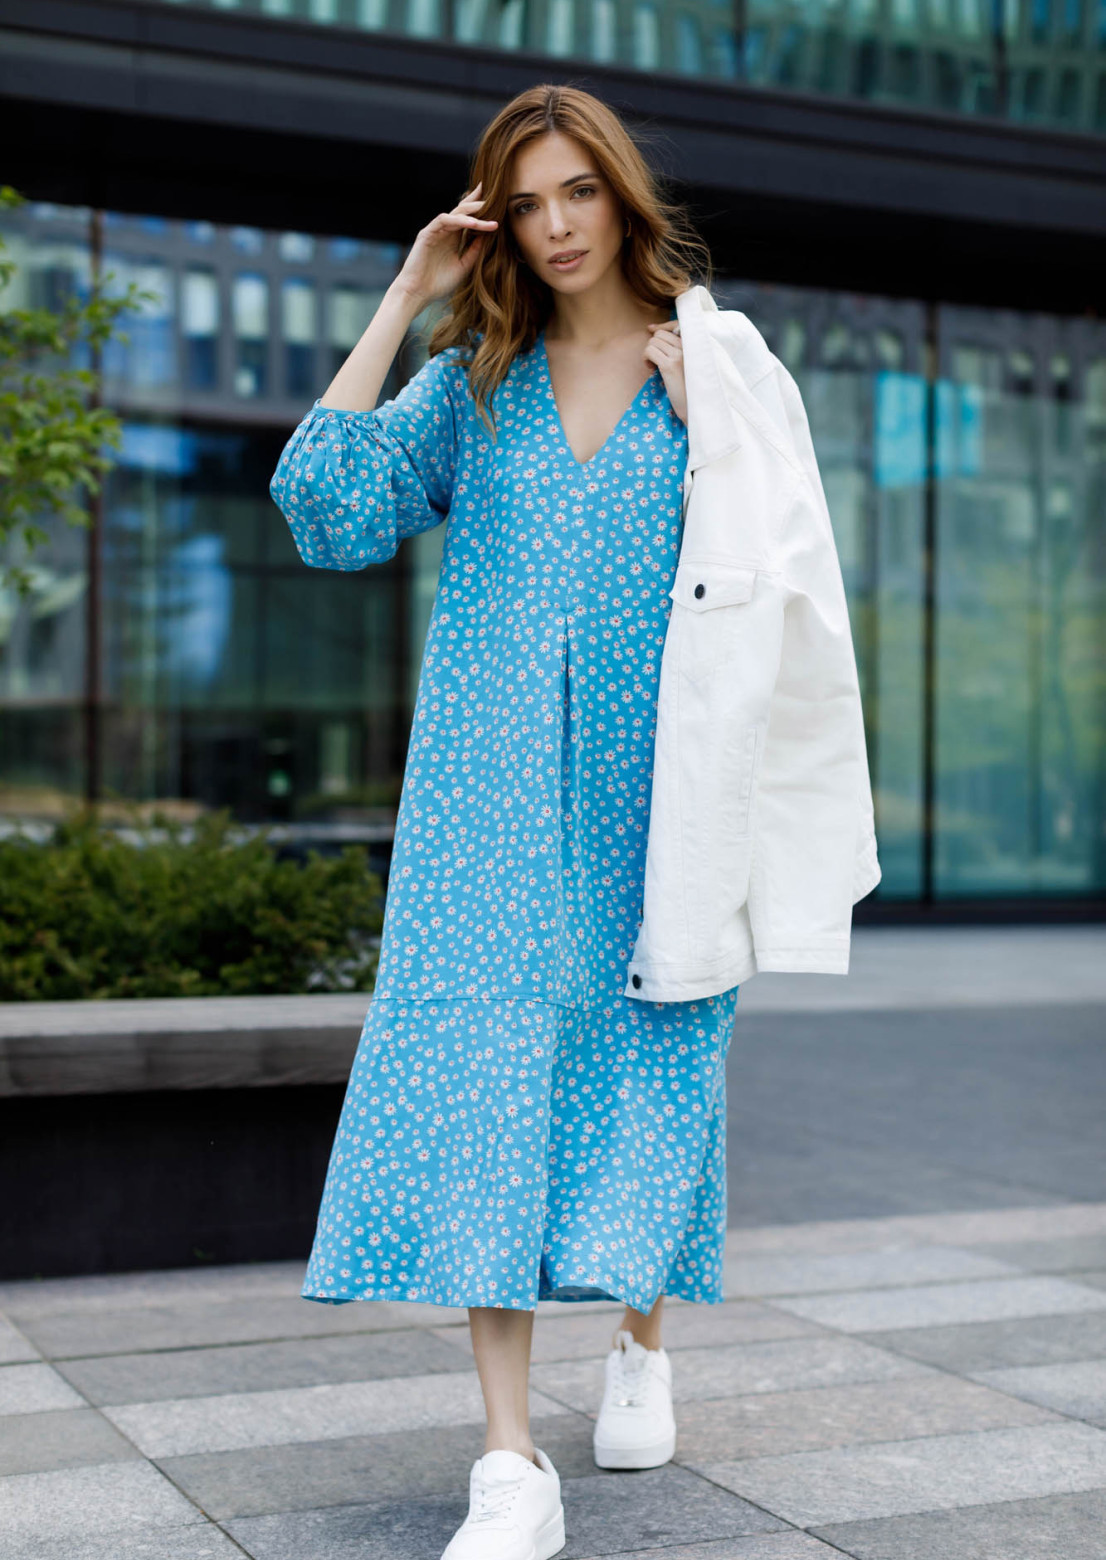 Blue color dress in a flower pattern with voluminous sleeves